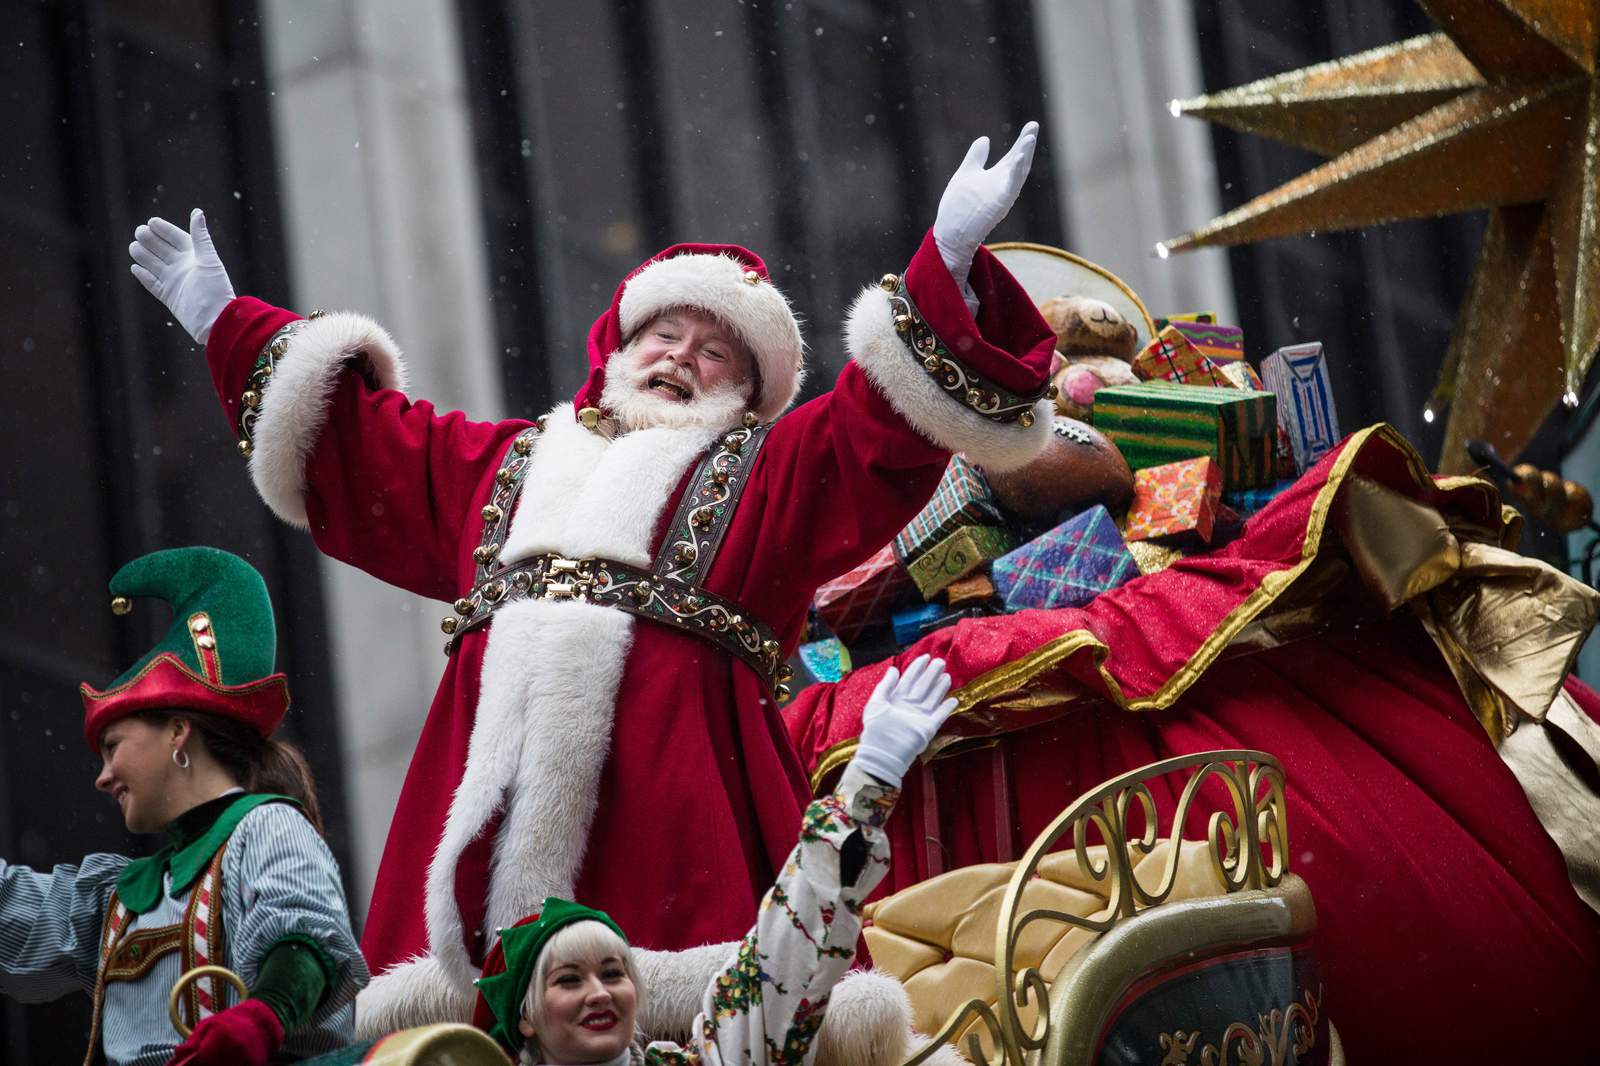 Don’t worry, kids: Fauci said Santa has ‘innate immunity’ from COVID-19, won’t be spreading it